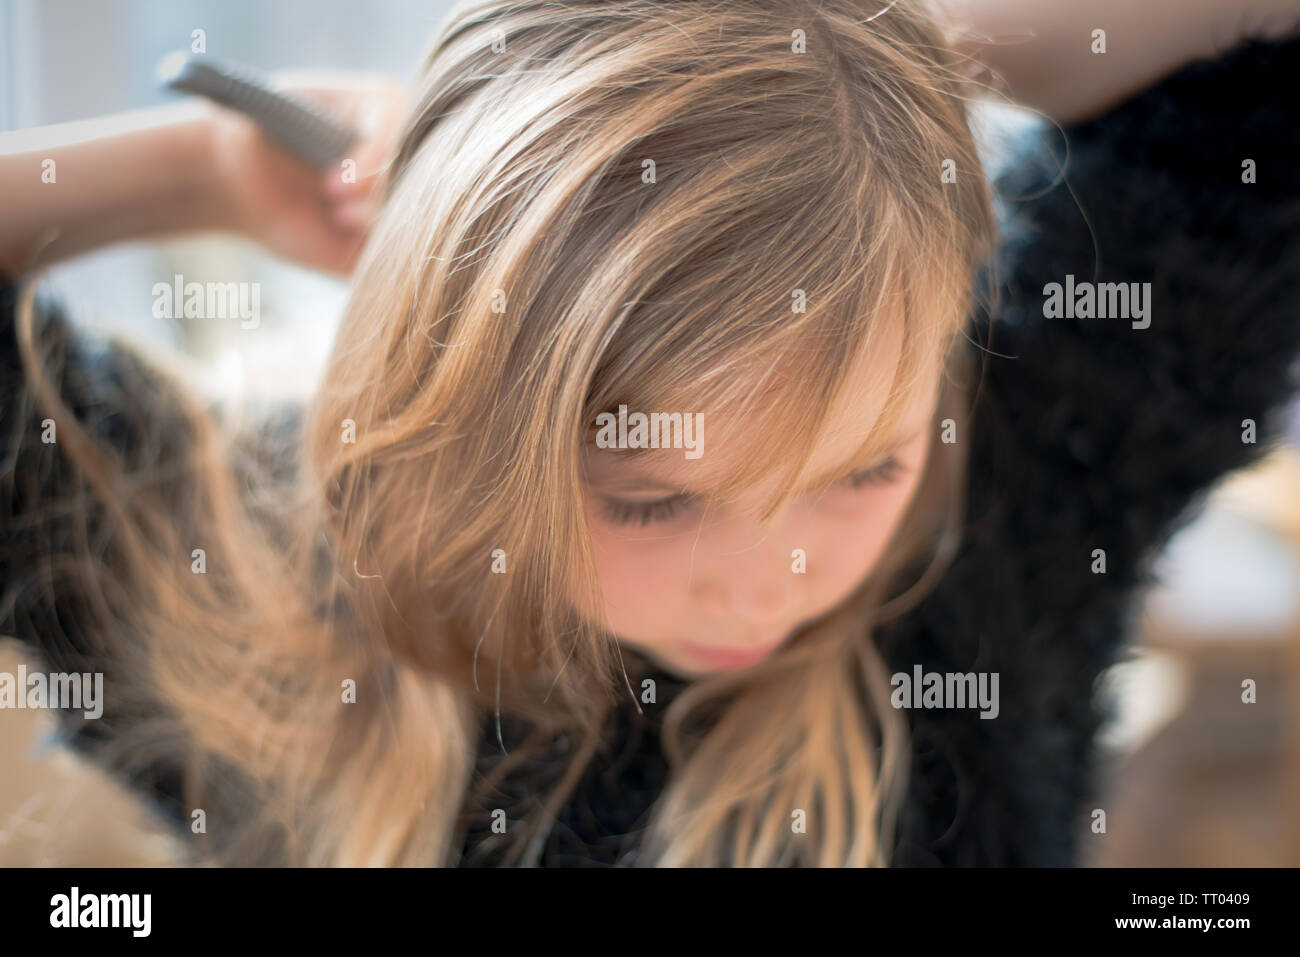 Young pretty girl brushing her long hair in soft dreamy focus Stock Photo